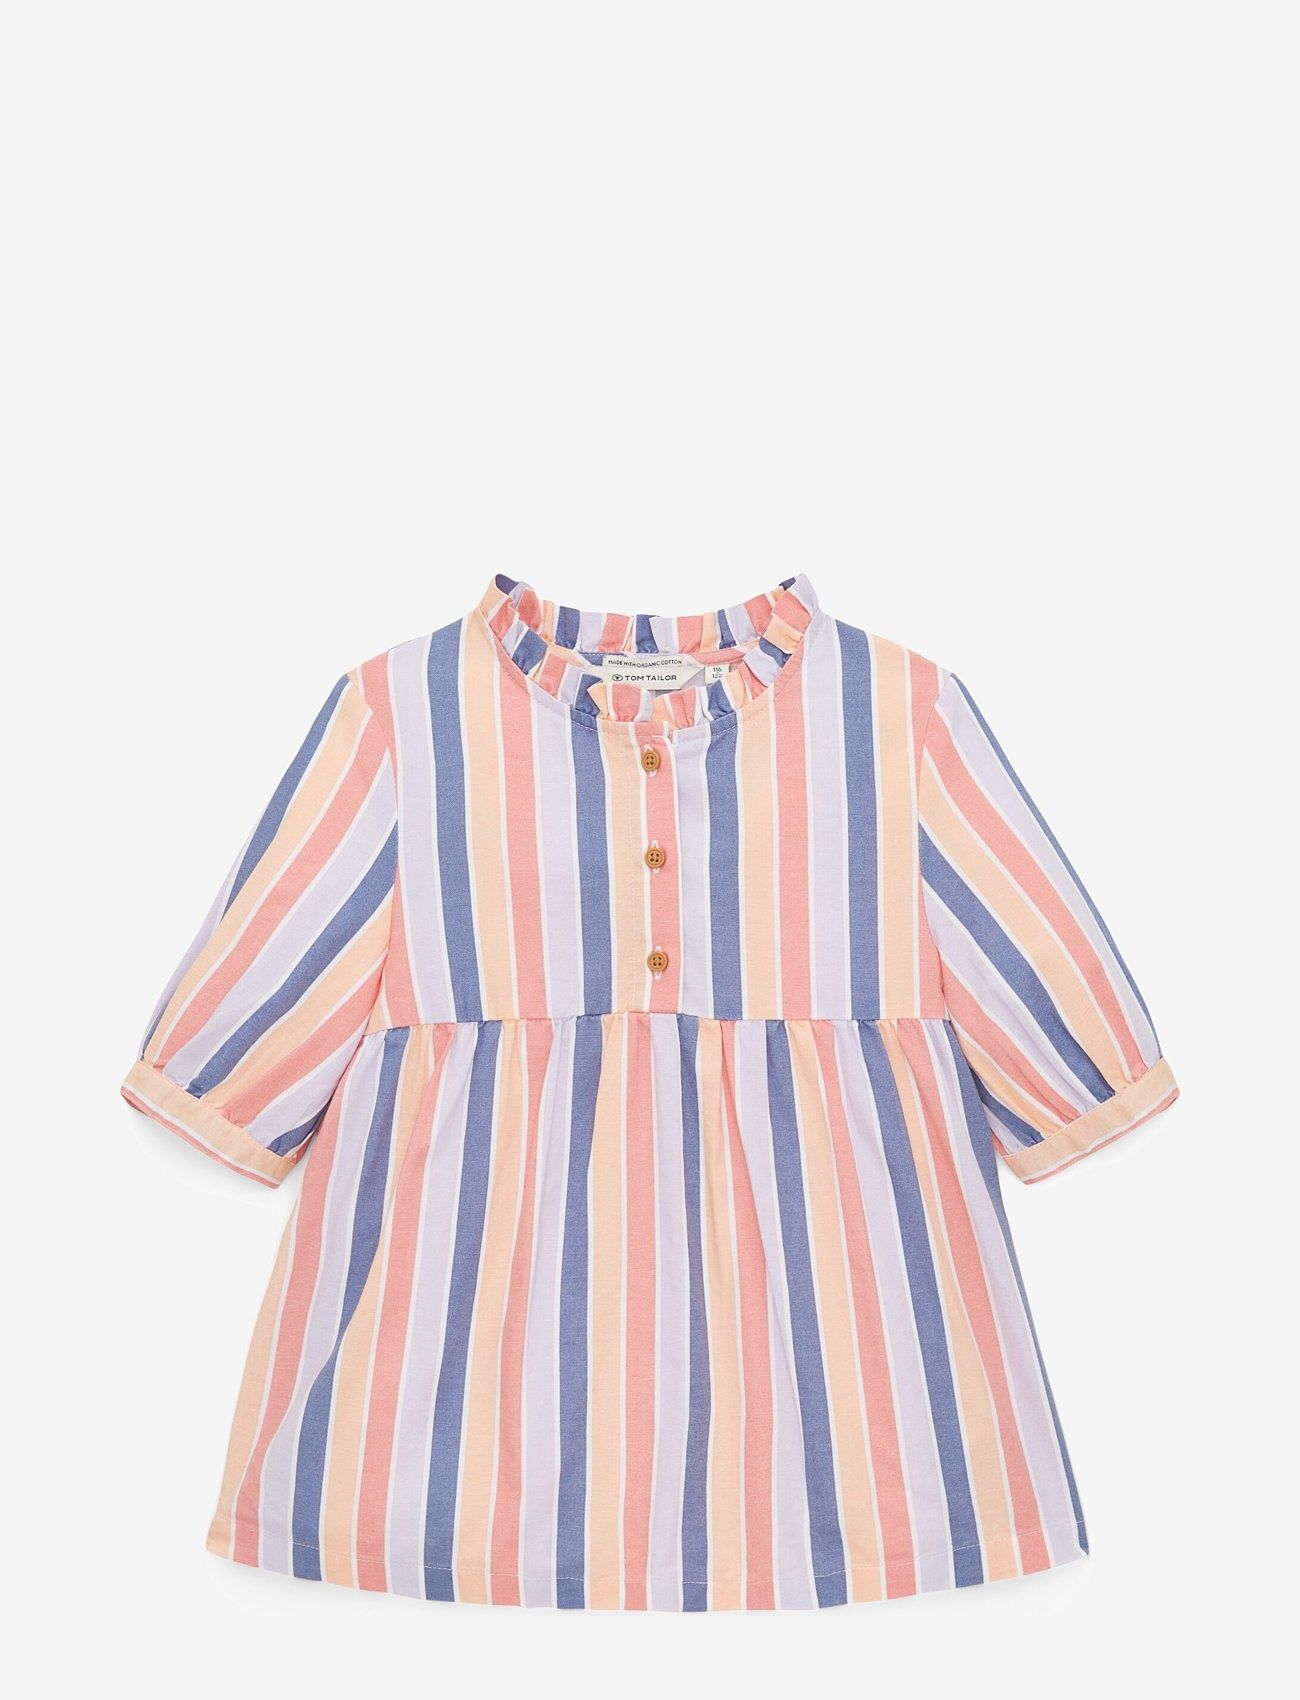 Tom Tailor - striped ruffle blouse - sommarfynd - vertical multicolor stripe - 0